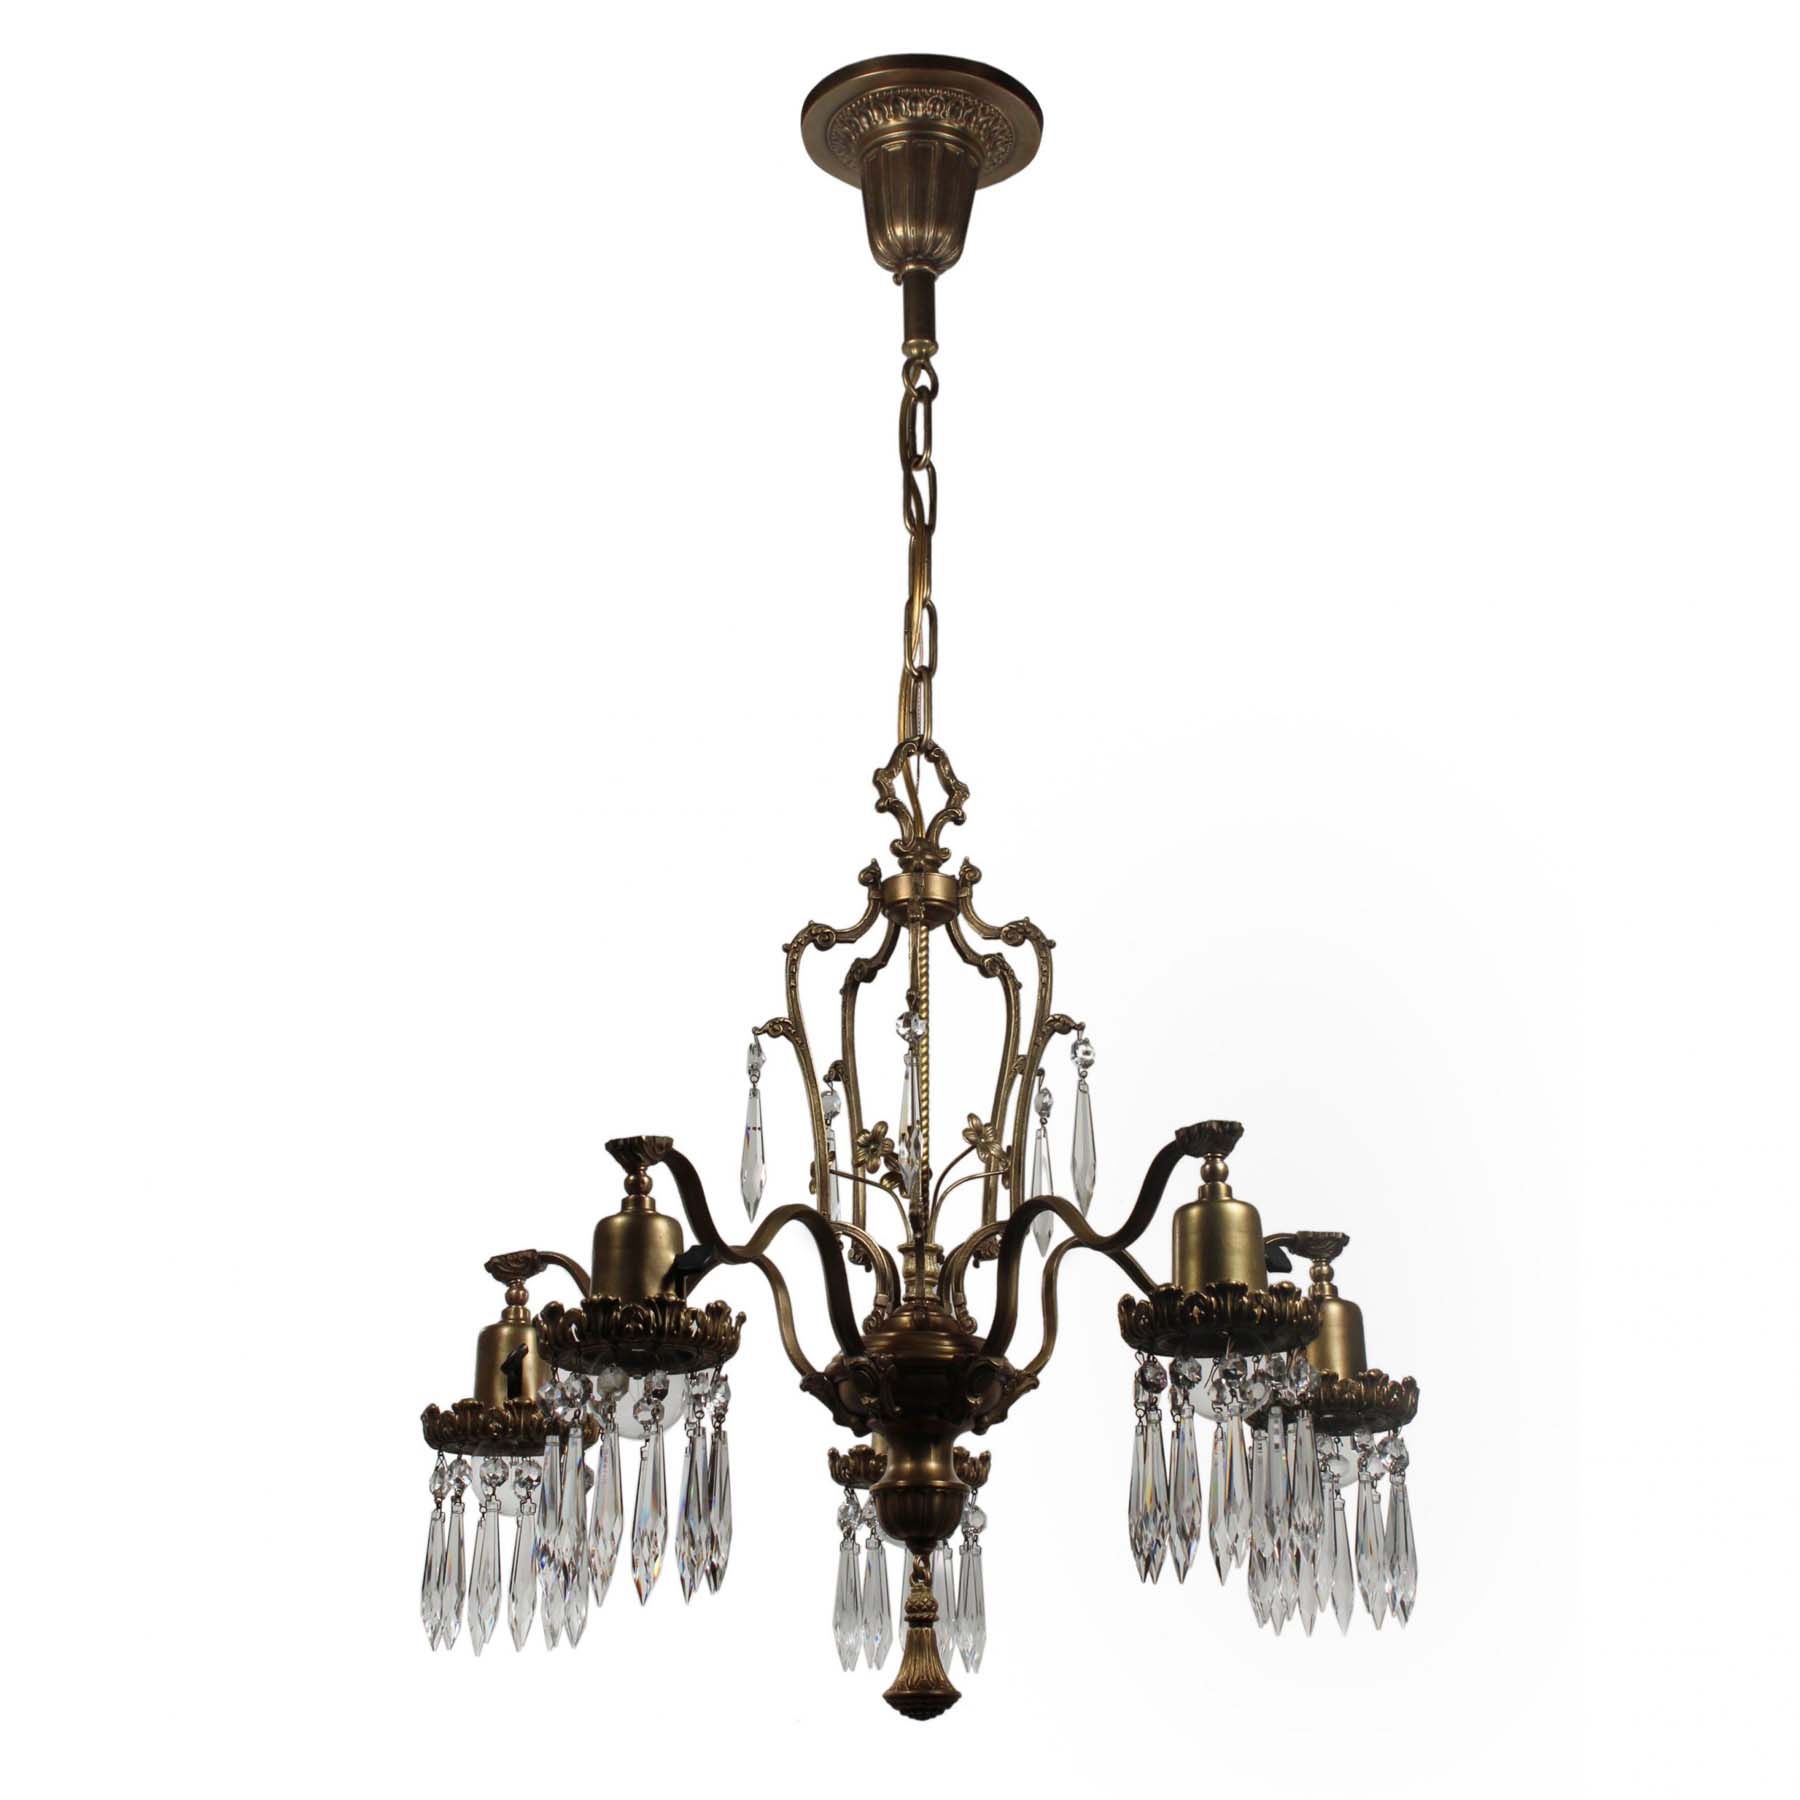 SOLD Neoclassical Chandelier with Prisms, Antique Lighting-0